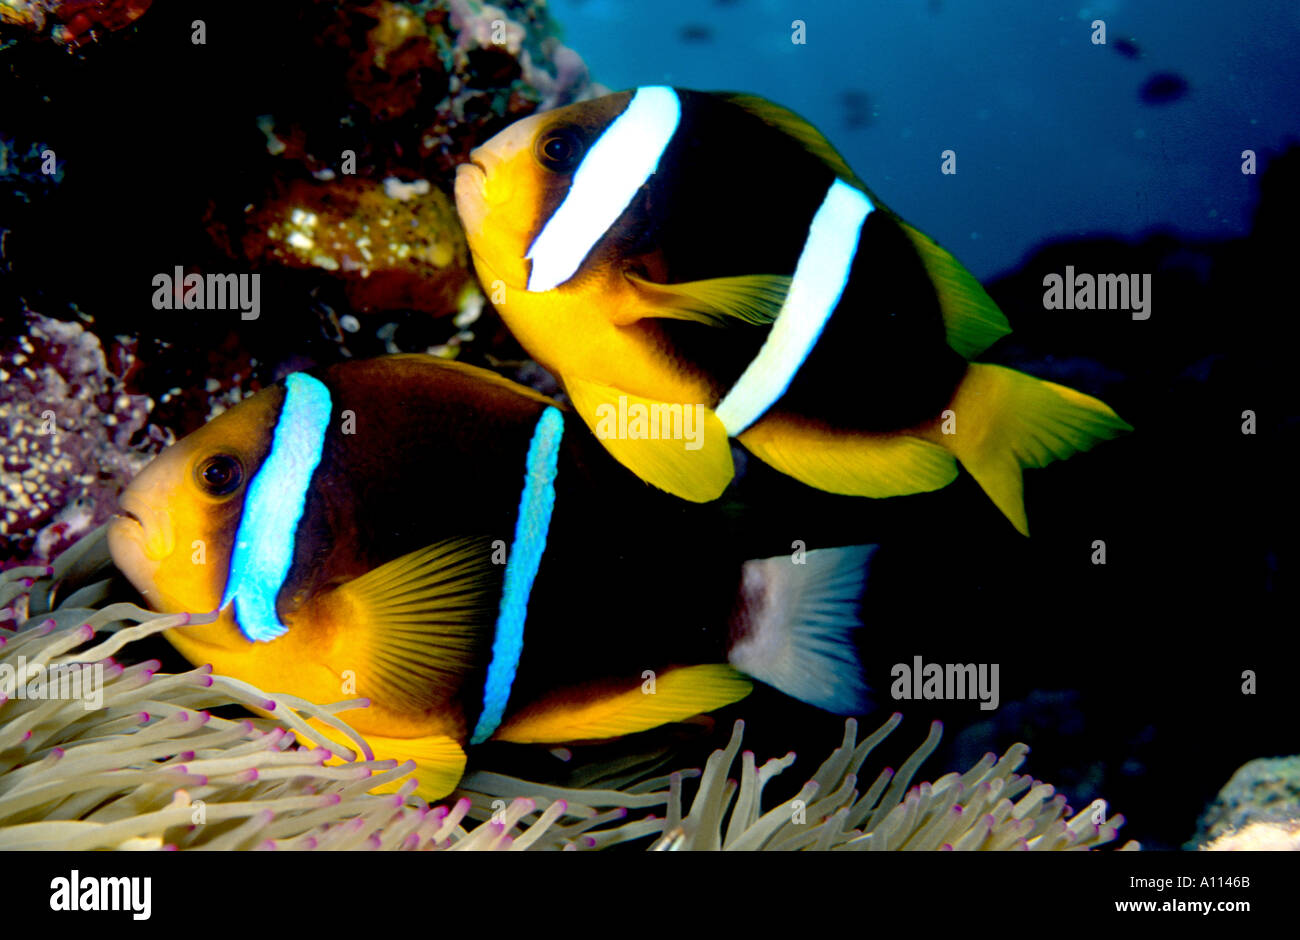 A PAIR OF CLARKS ANEMONEFISH Amphiprion clarkii POSE SIDE BY SIDE ABOVE THEIR HOST ANEMONE IN FIJI Stock Photo